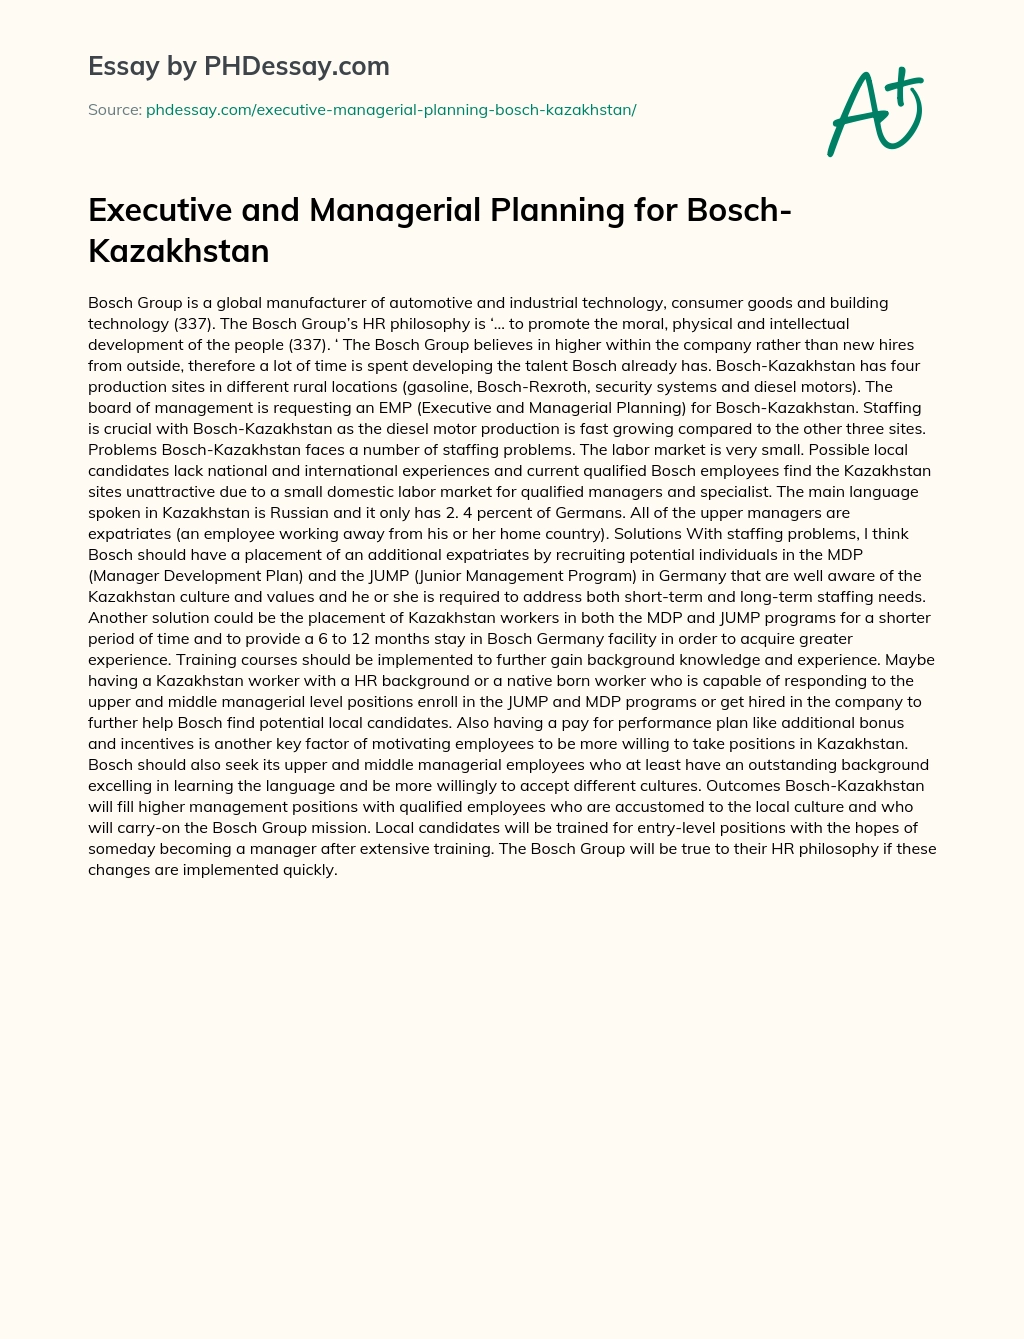 Executive and Managerial Planning for Bosch-Kazakhstan essay